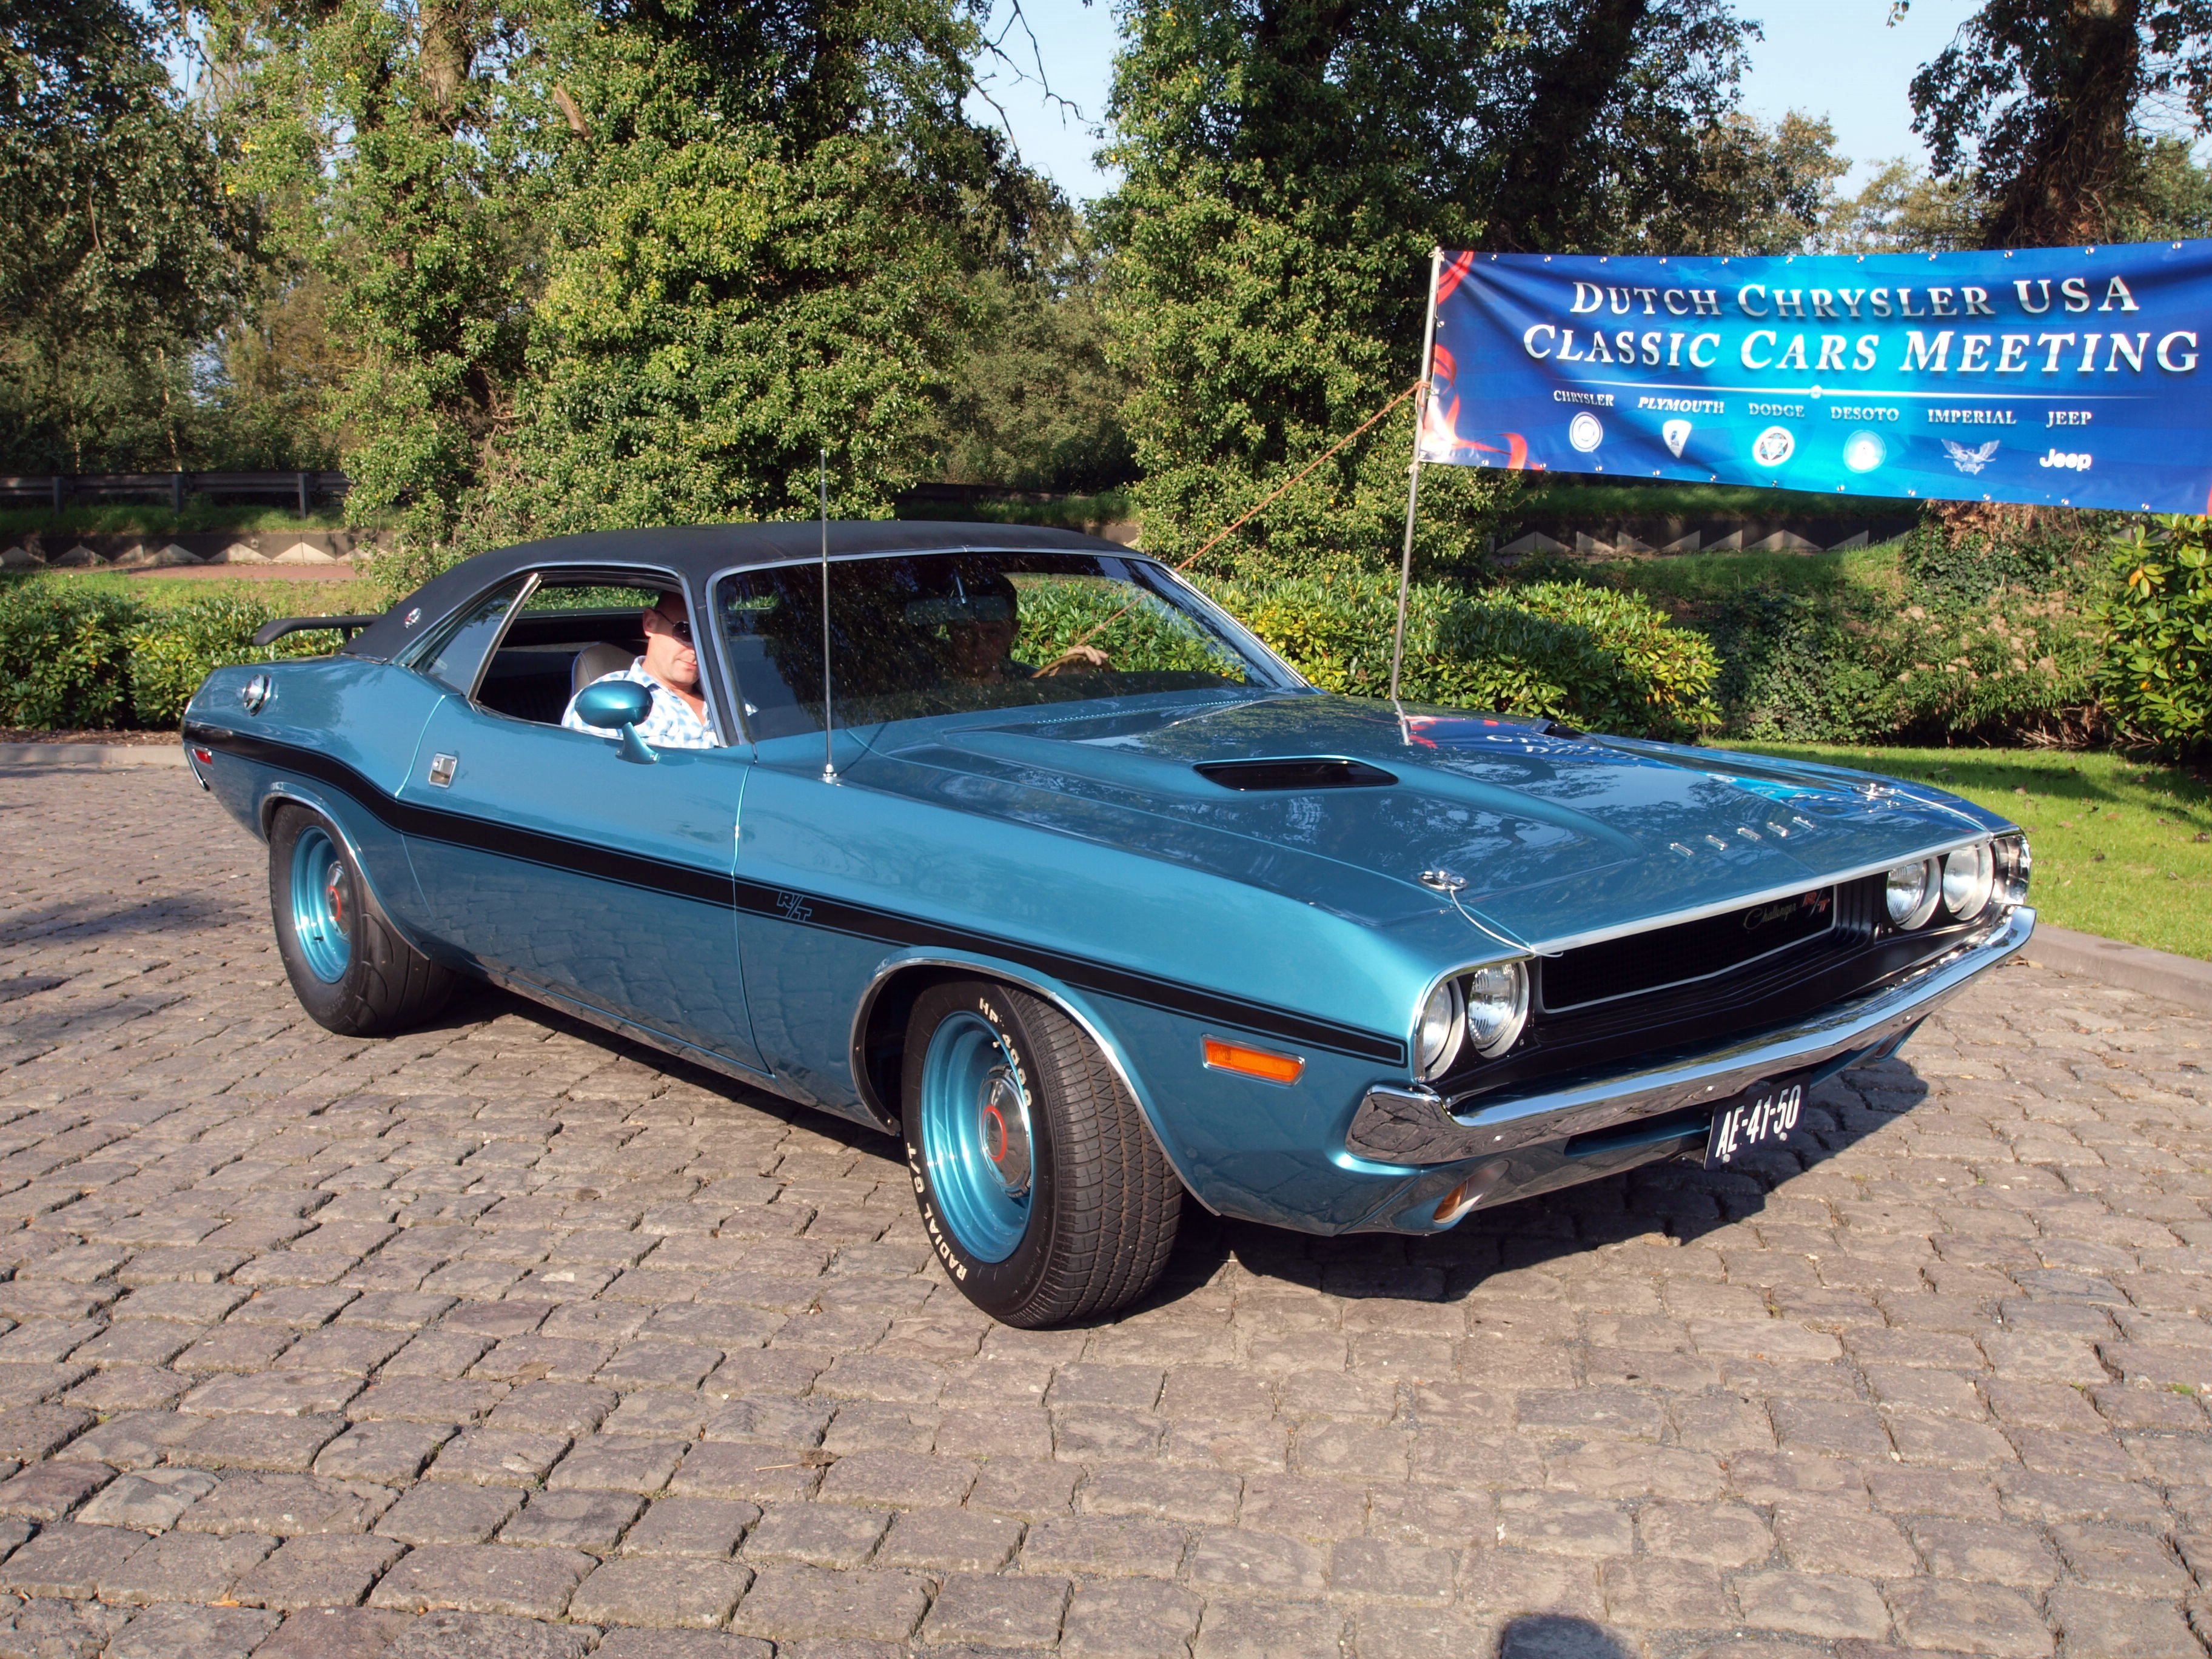 1970, Challenger, Classic, Dodge, Muscle, Cars Wallpaper